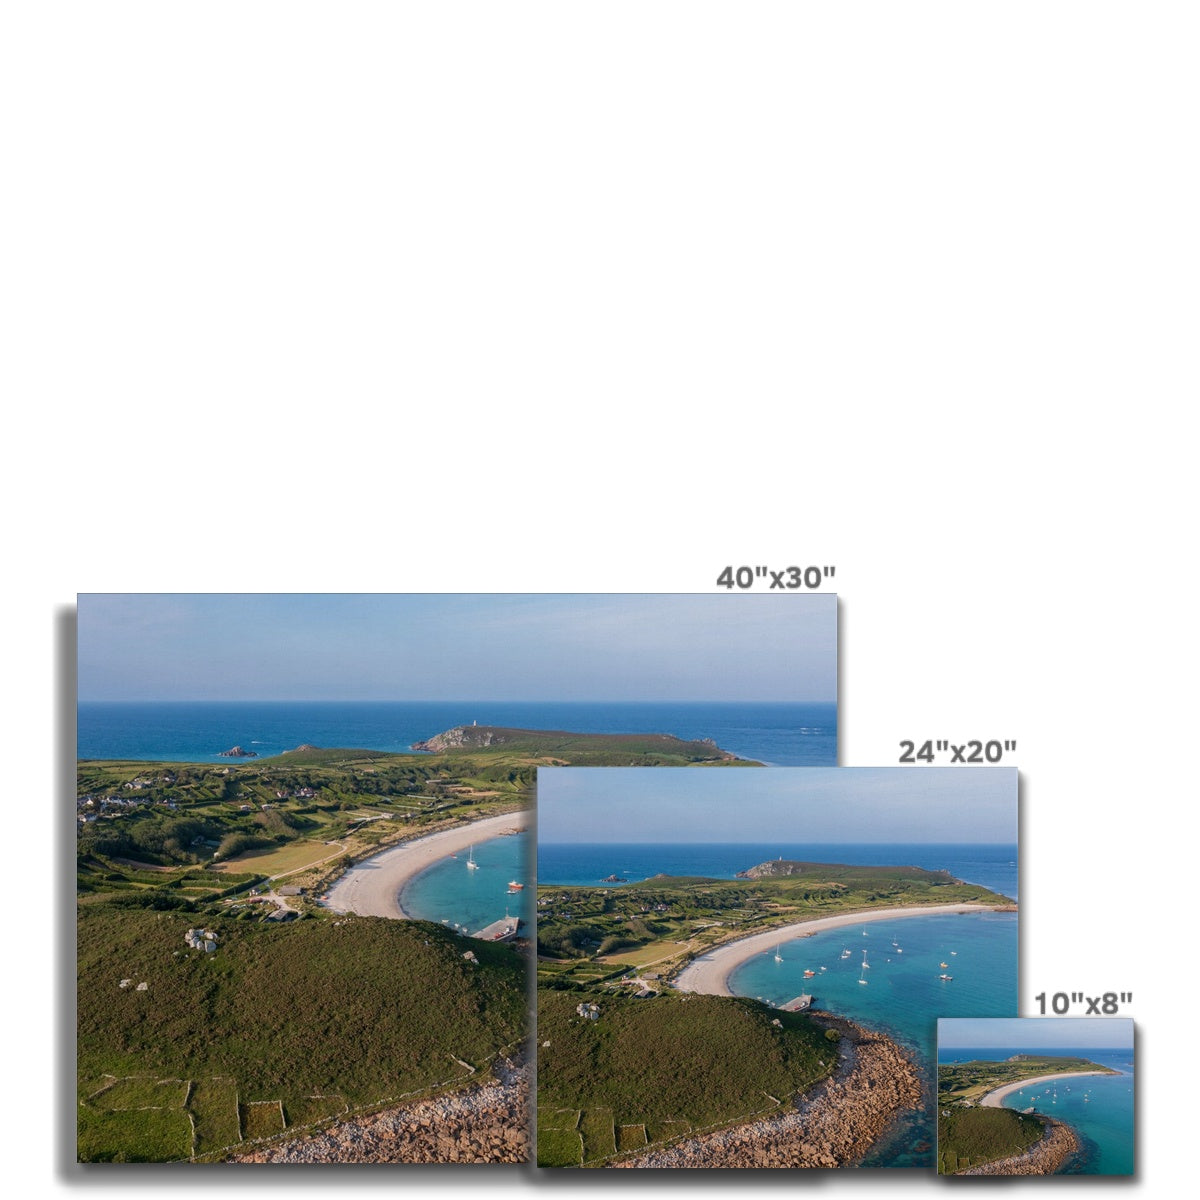 cruthers hill st martins canvas sizes